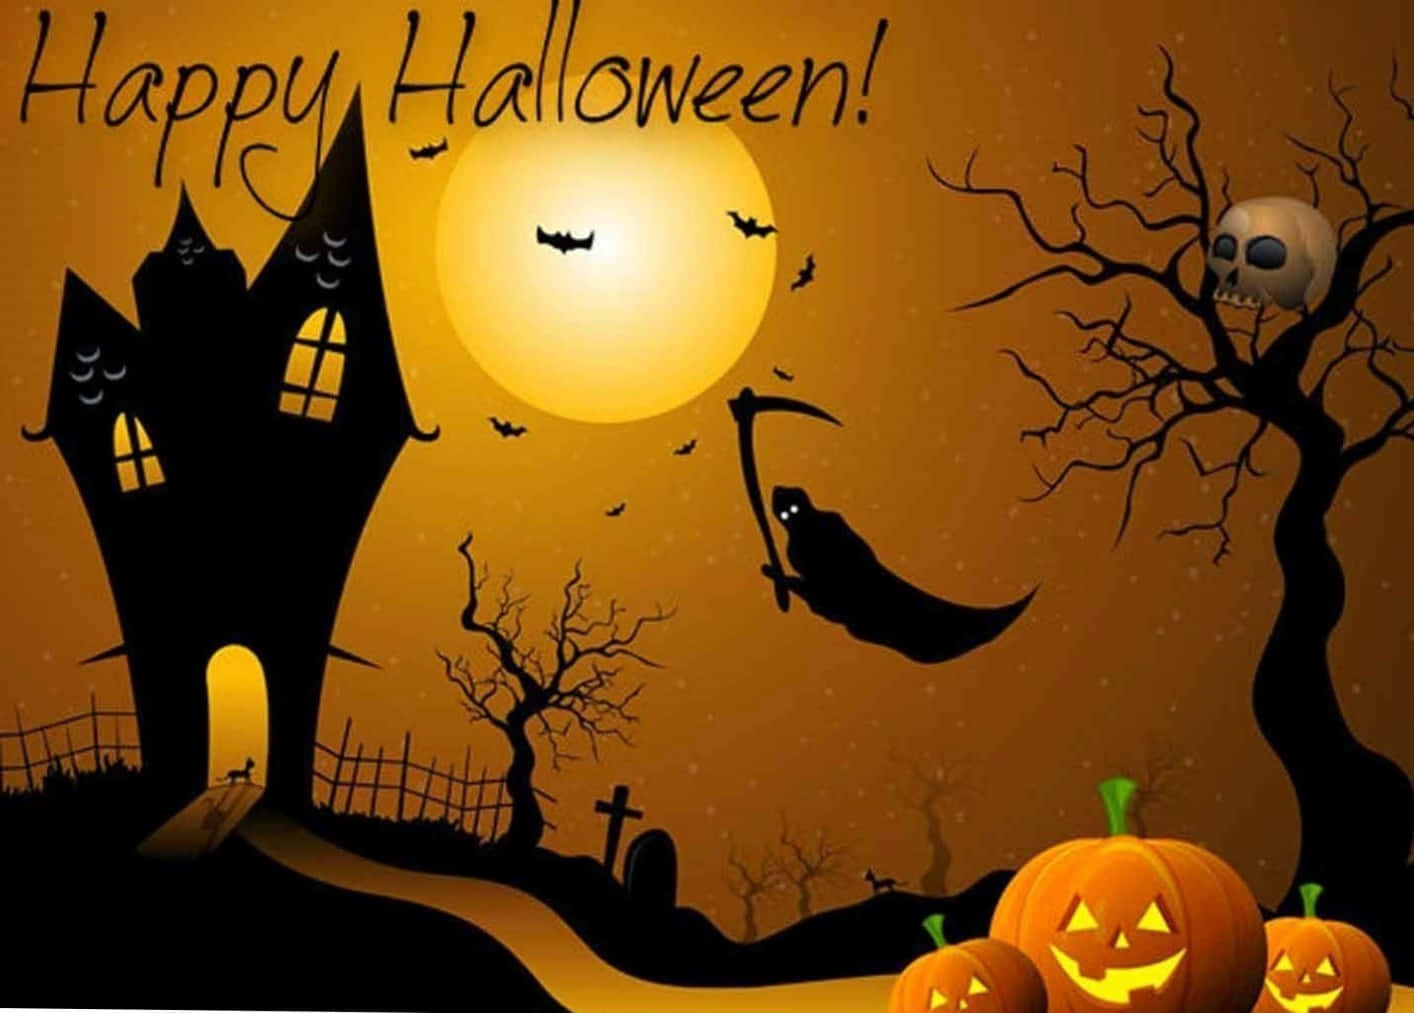 Halloween Cartoon Haunted House With Grim Reaper Picture